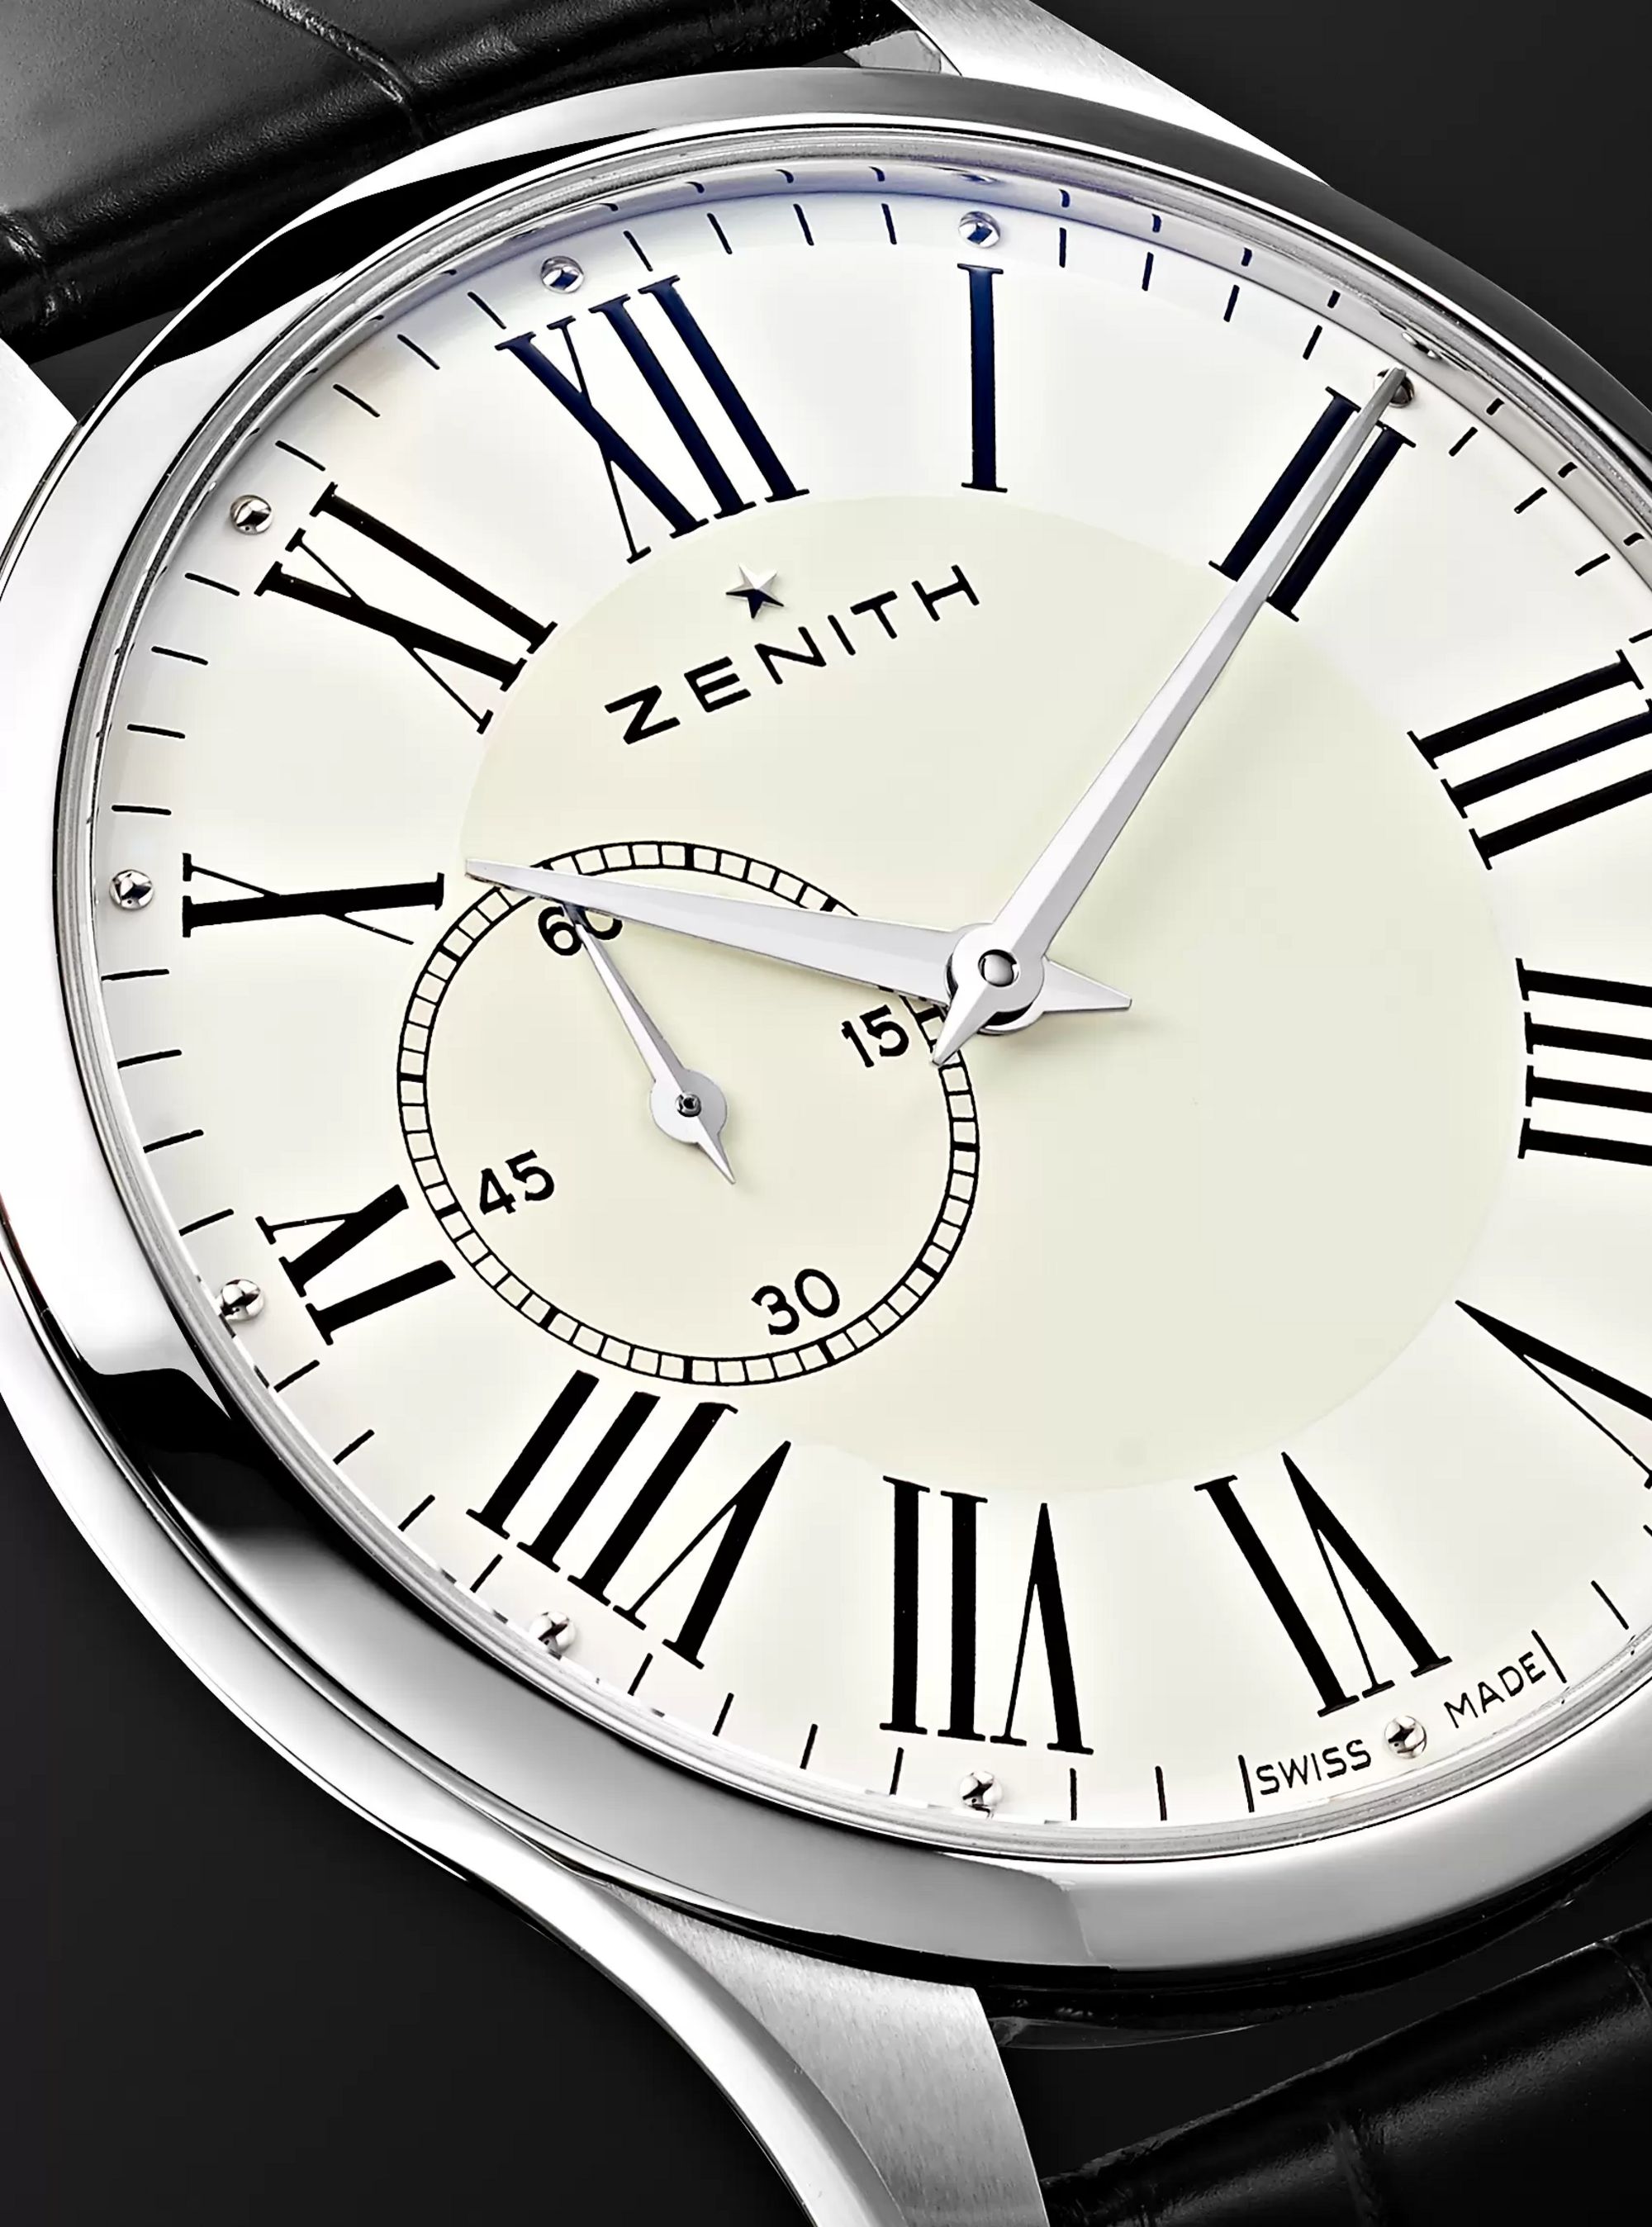 ZENITH Elite Ultra-Thin Roman Dial 40mm Stainless Steel and Alligator Watch, Ref. No. 03.2010.681/11.C493